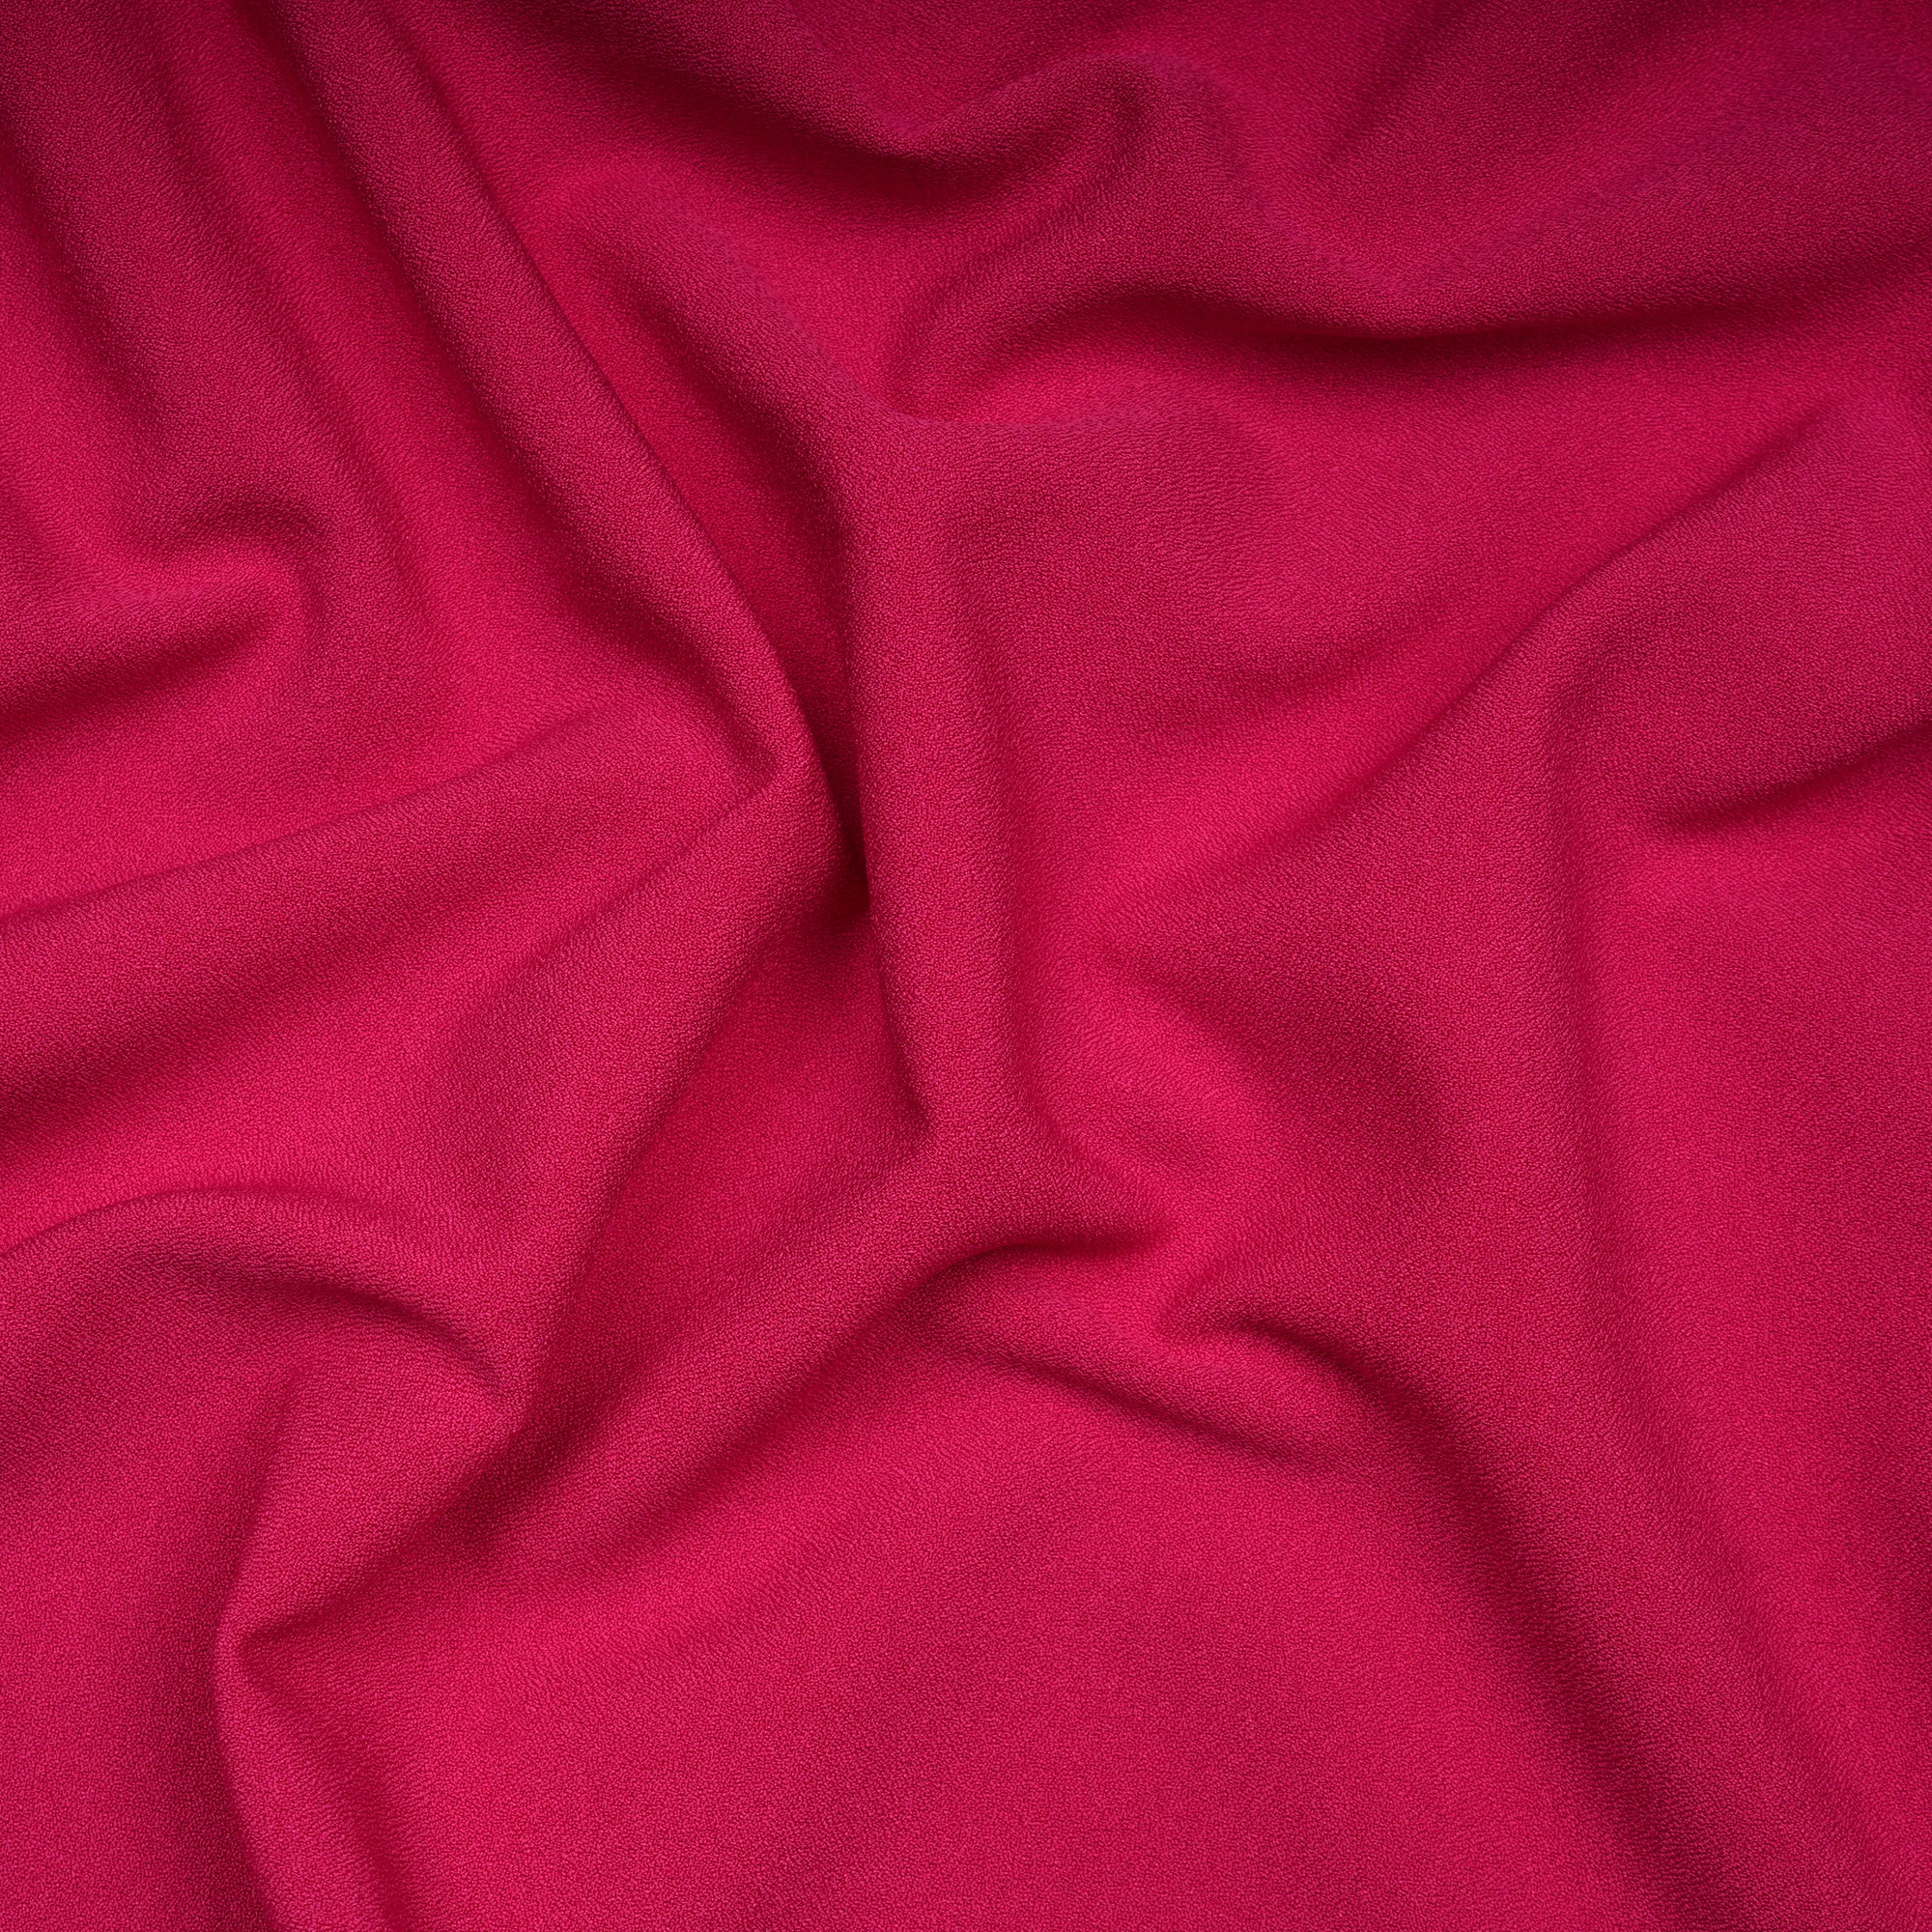 Hot Pink Solid Dyed Imported Moss Crepe Fabric (60" Width)